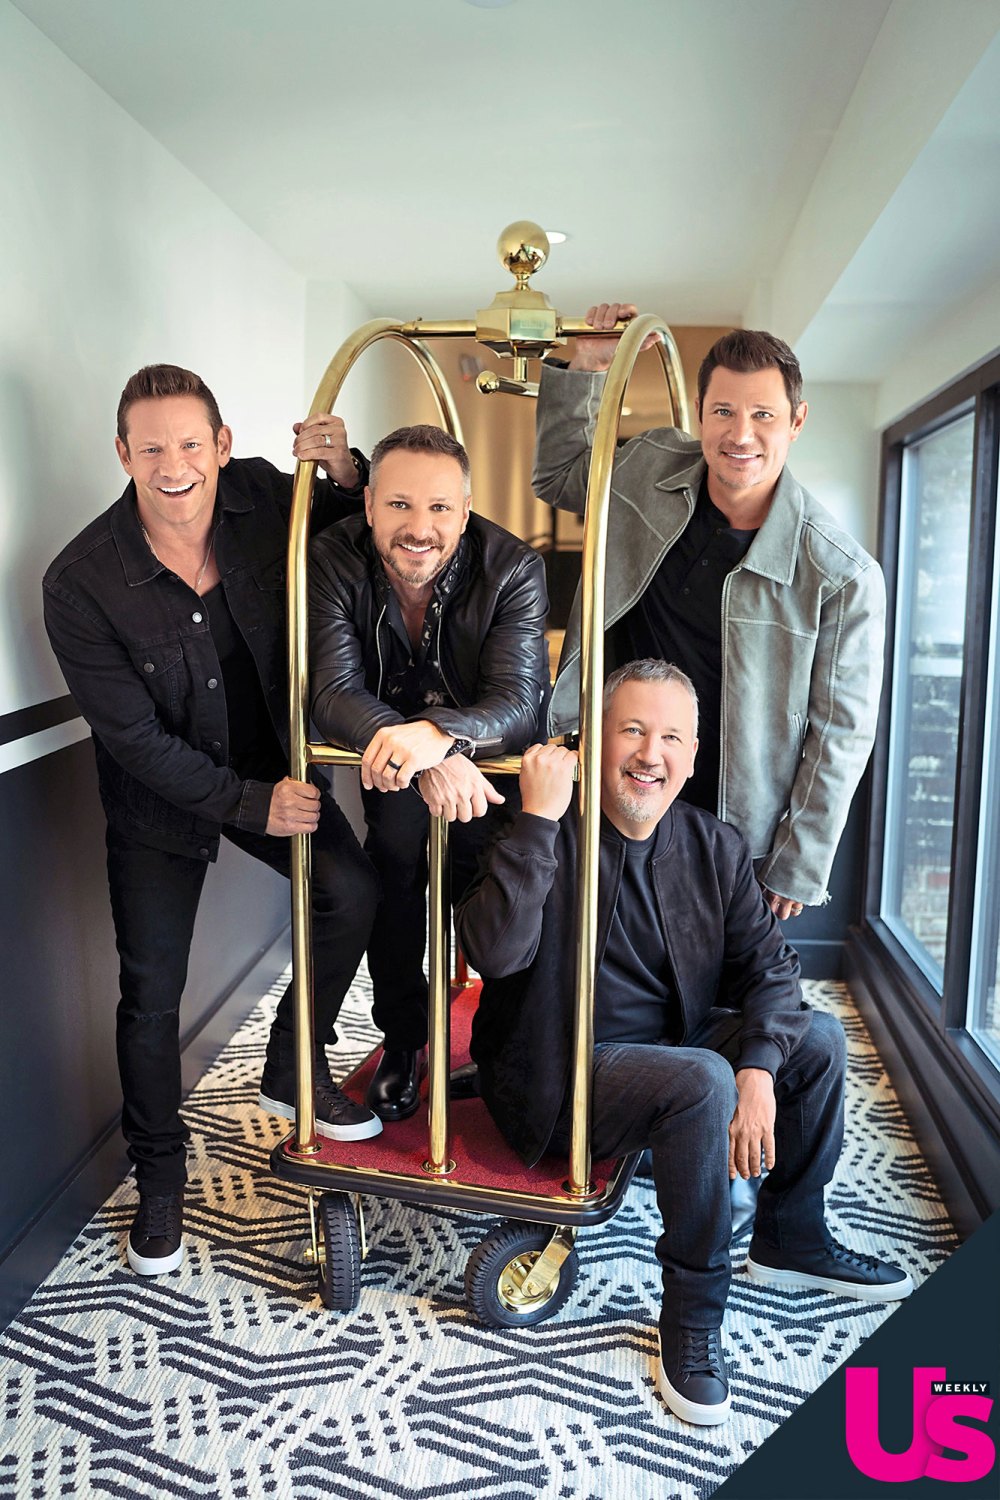 98 Degrees US Weekly 2339 Cover Story John Chapple 442